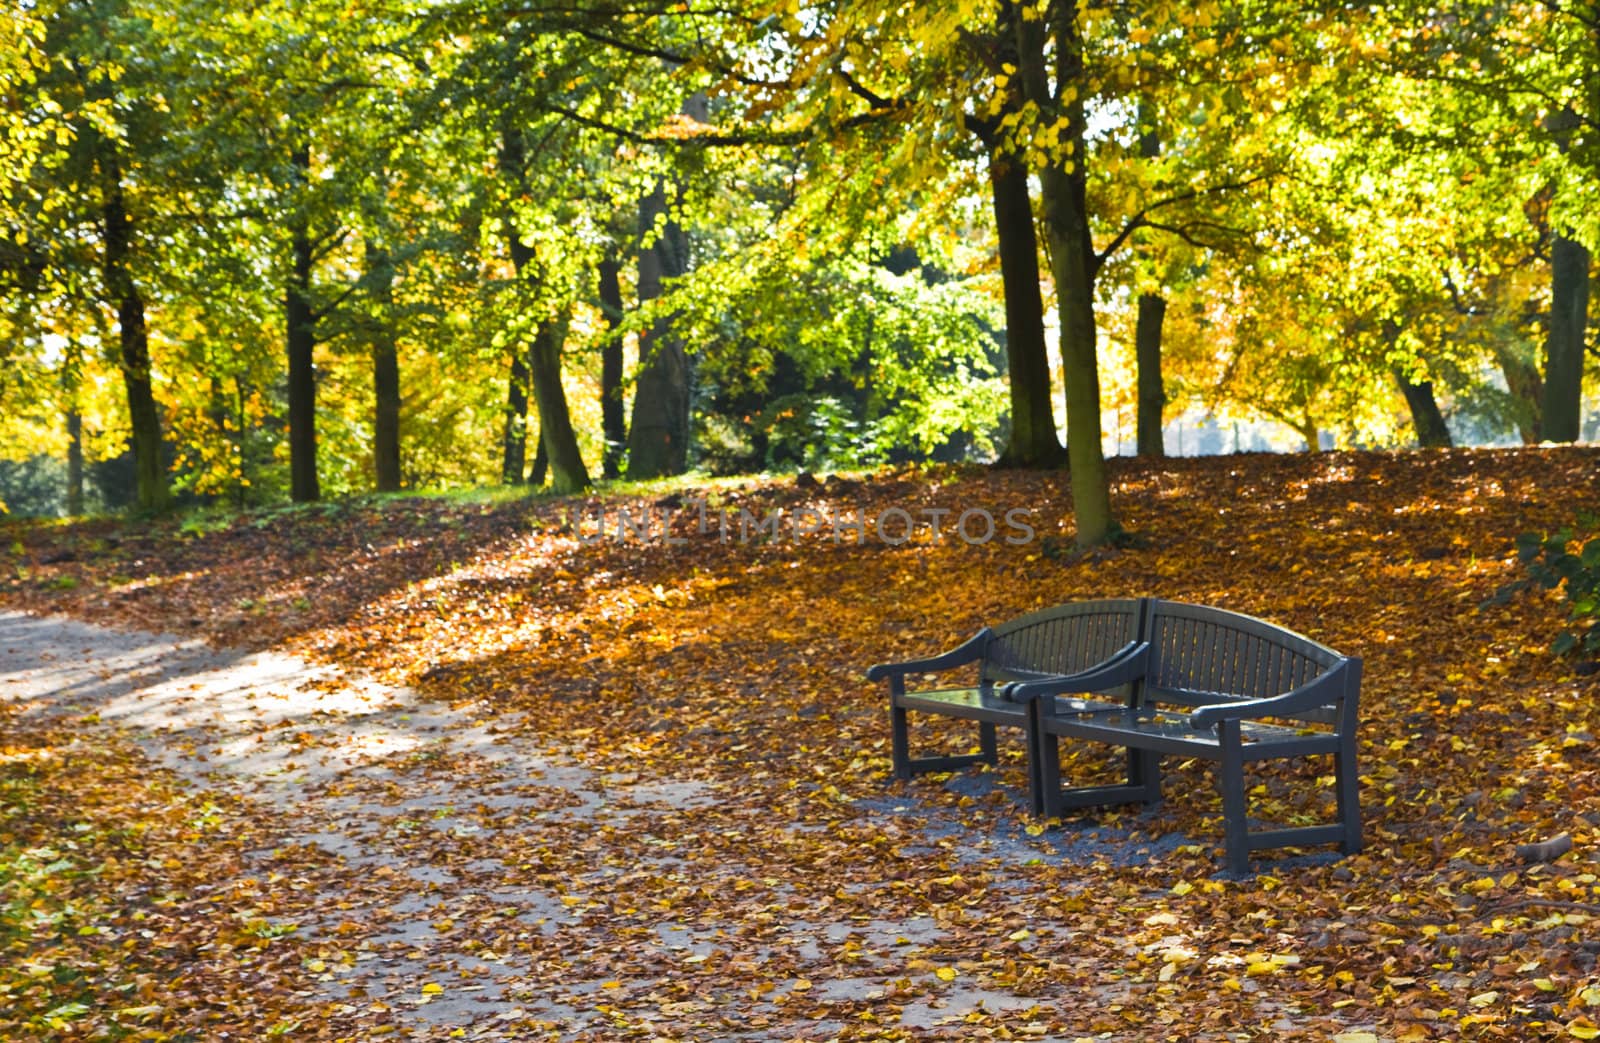 Bench in park in autumn by Colette